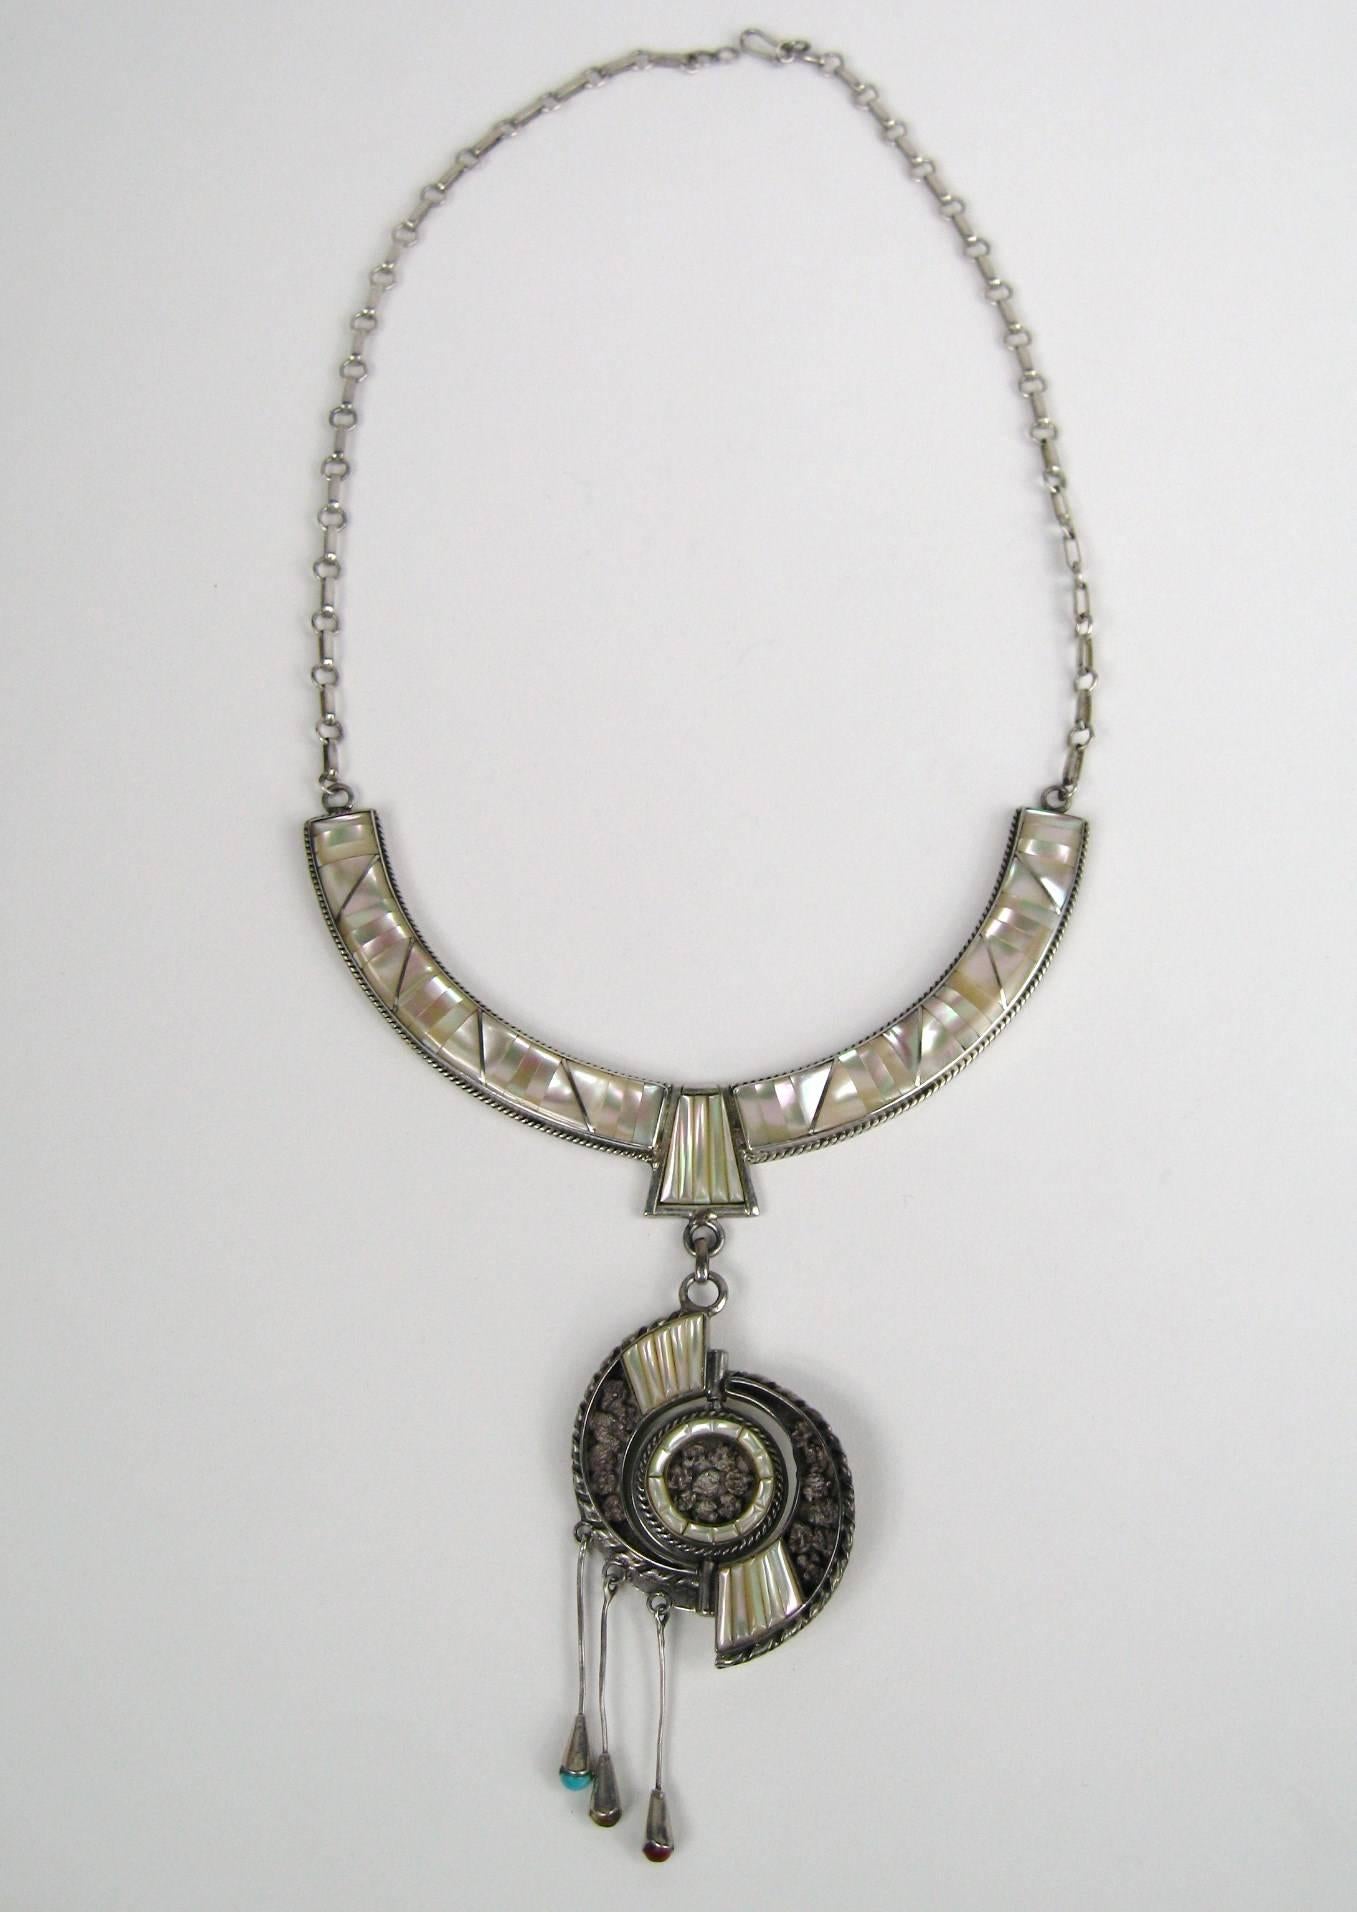 Stunning Sun Face Necklace, Coral, Turquoise and Mother of pearl set in sterling silver. 3 Dangles with stones set. This measures 26 in total drop. The Spinner is 3 in, Collar is .50 in wide. This is out of a massive collection of Hopi, Zuni,